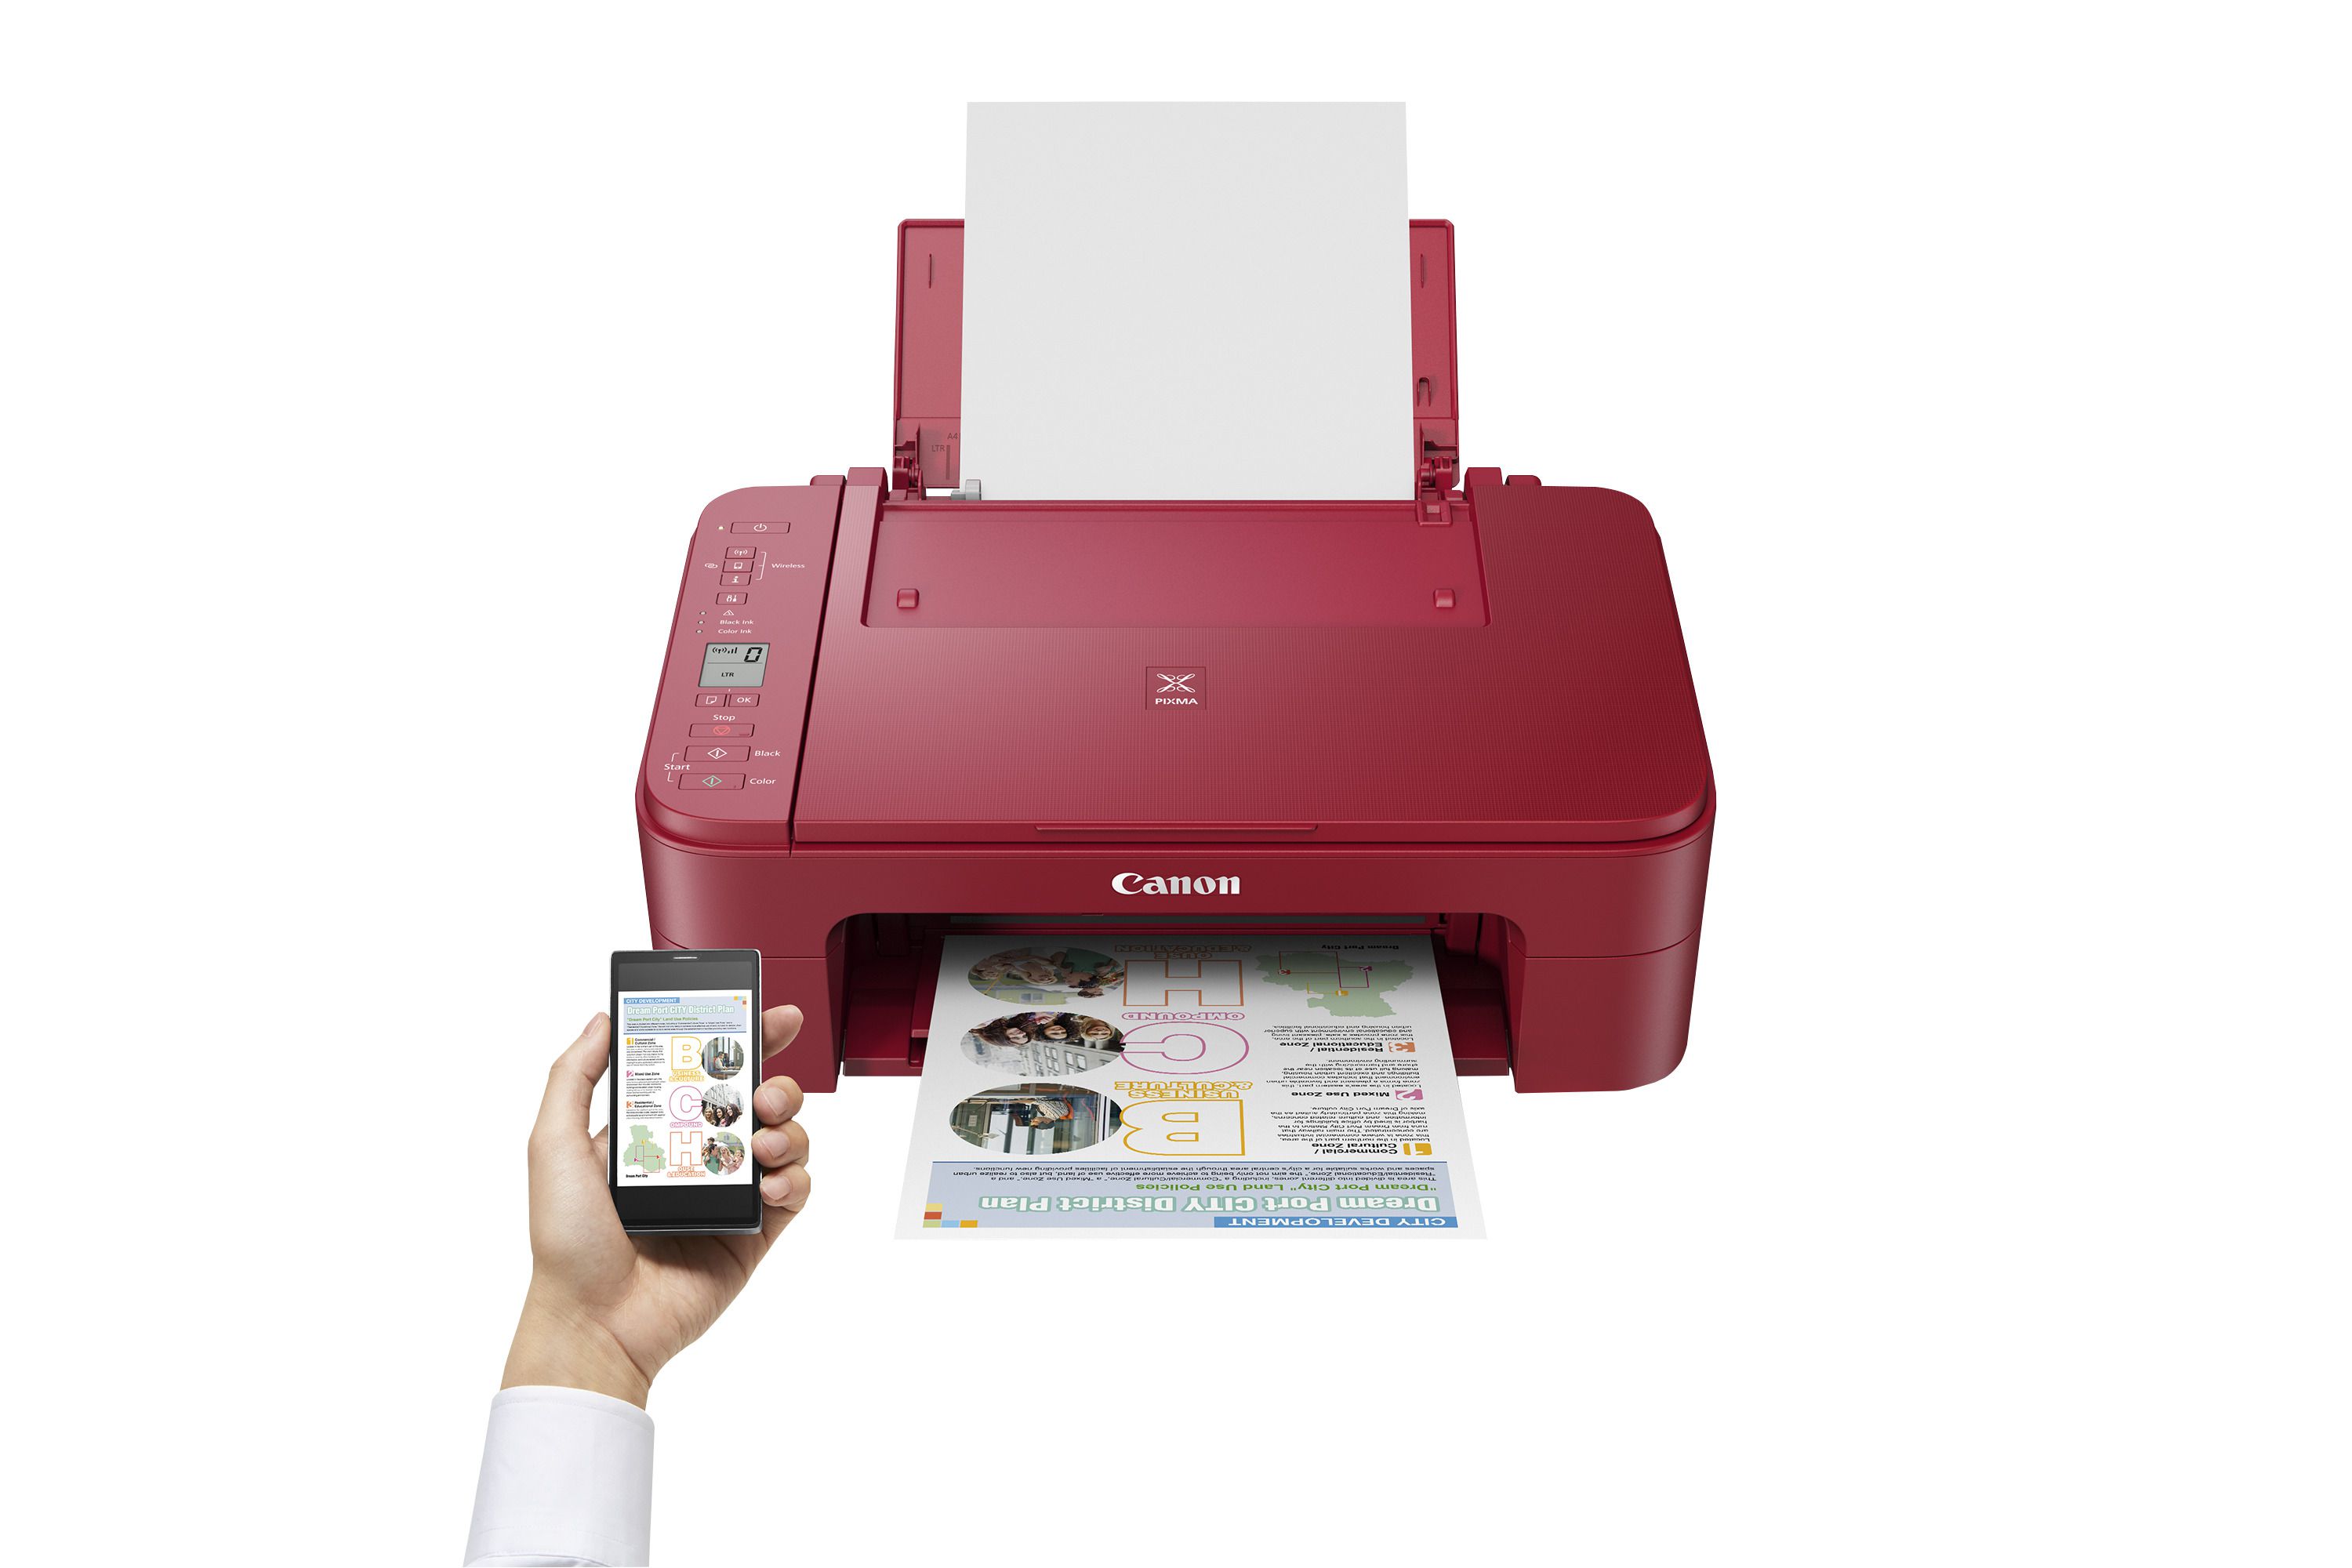 TS3352 PIXMA Red engelberger Canon ag -